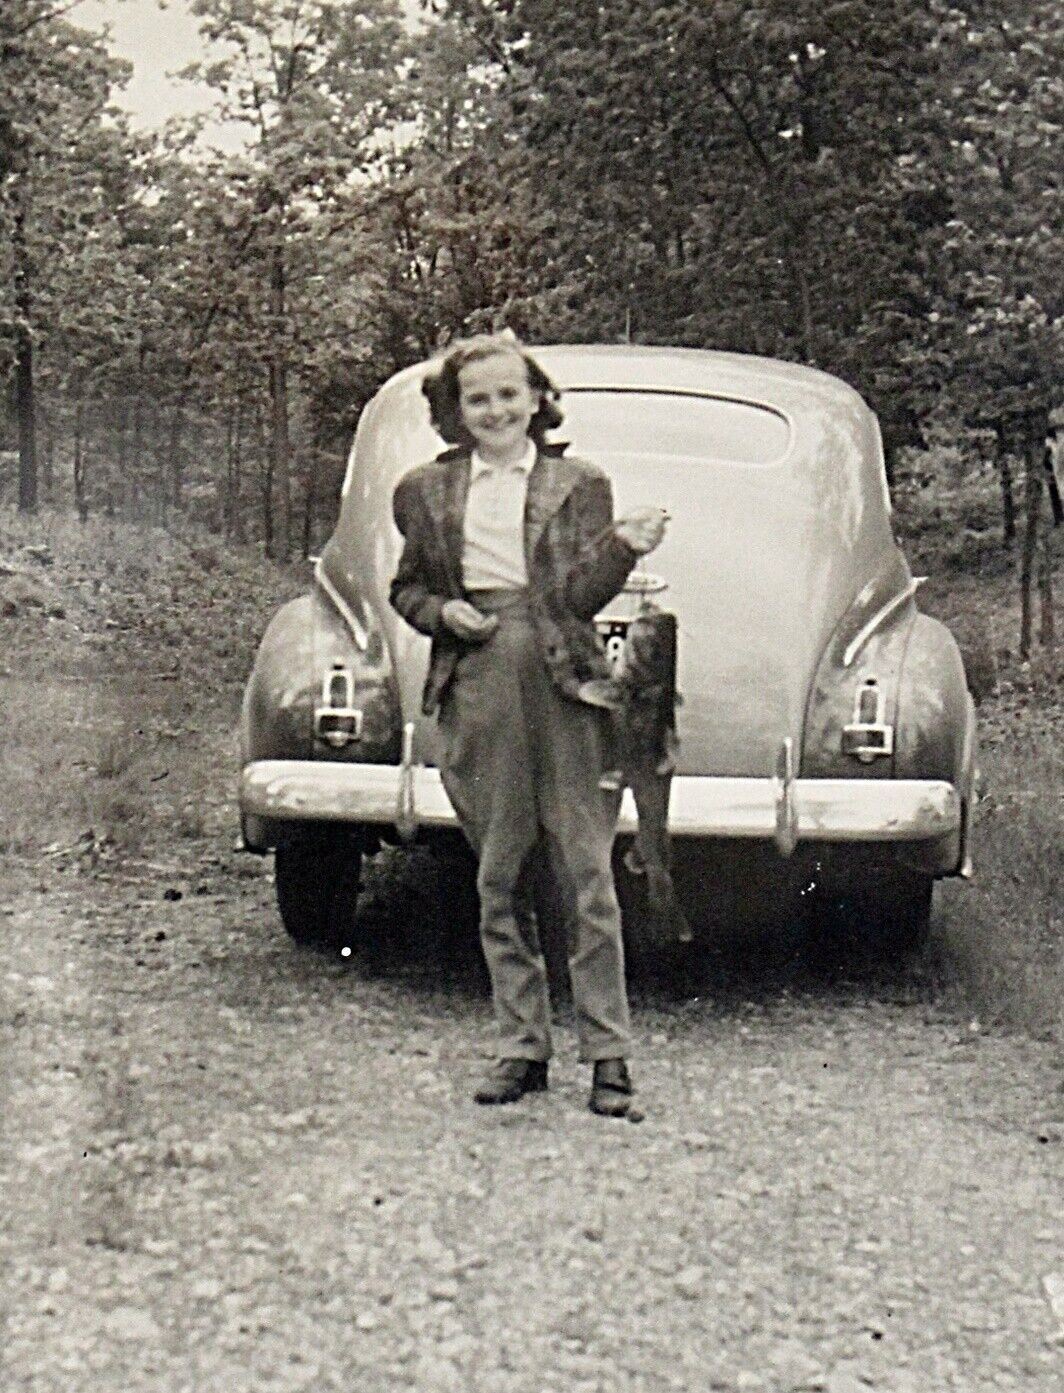 1941 Photograph Dianne Walker with Her Catch. Great 1940s Auto Photo Fishing